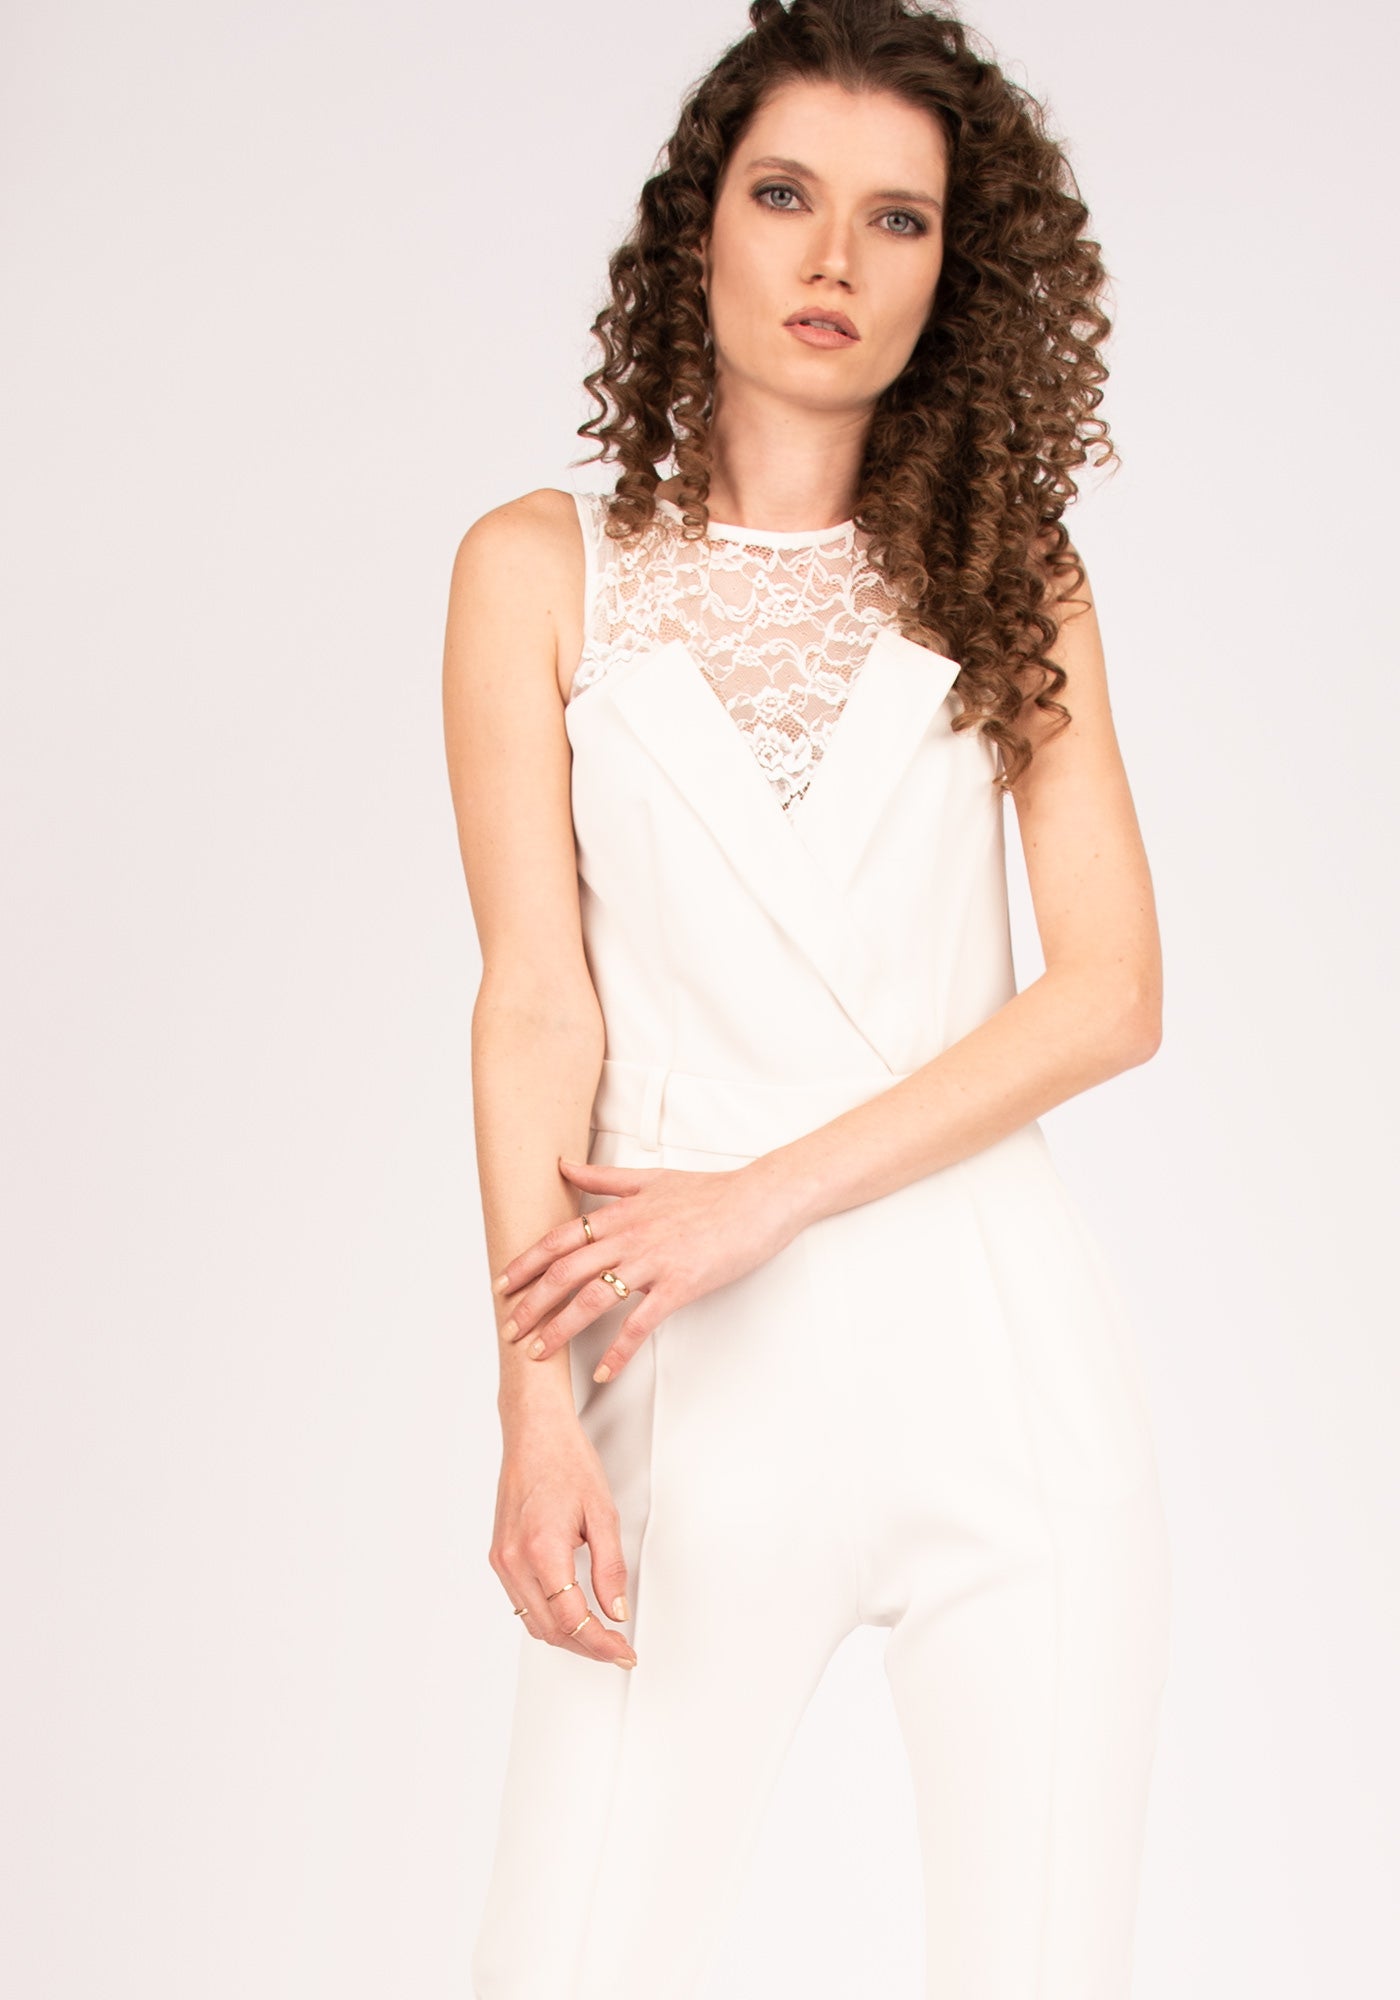 Women's Formal Jumpsuit with Lace Details in Ecru